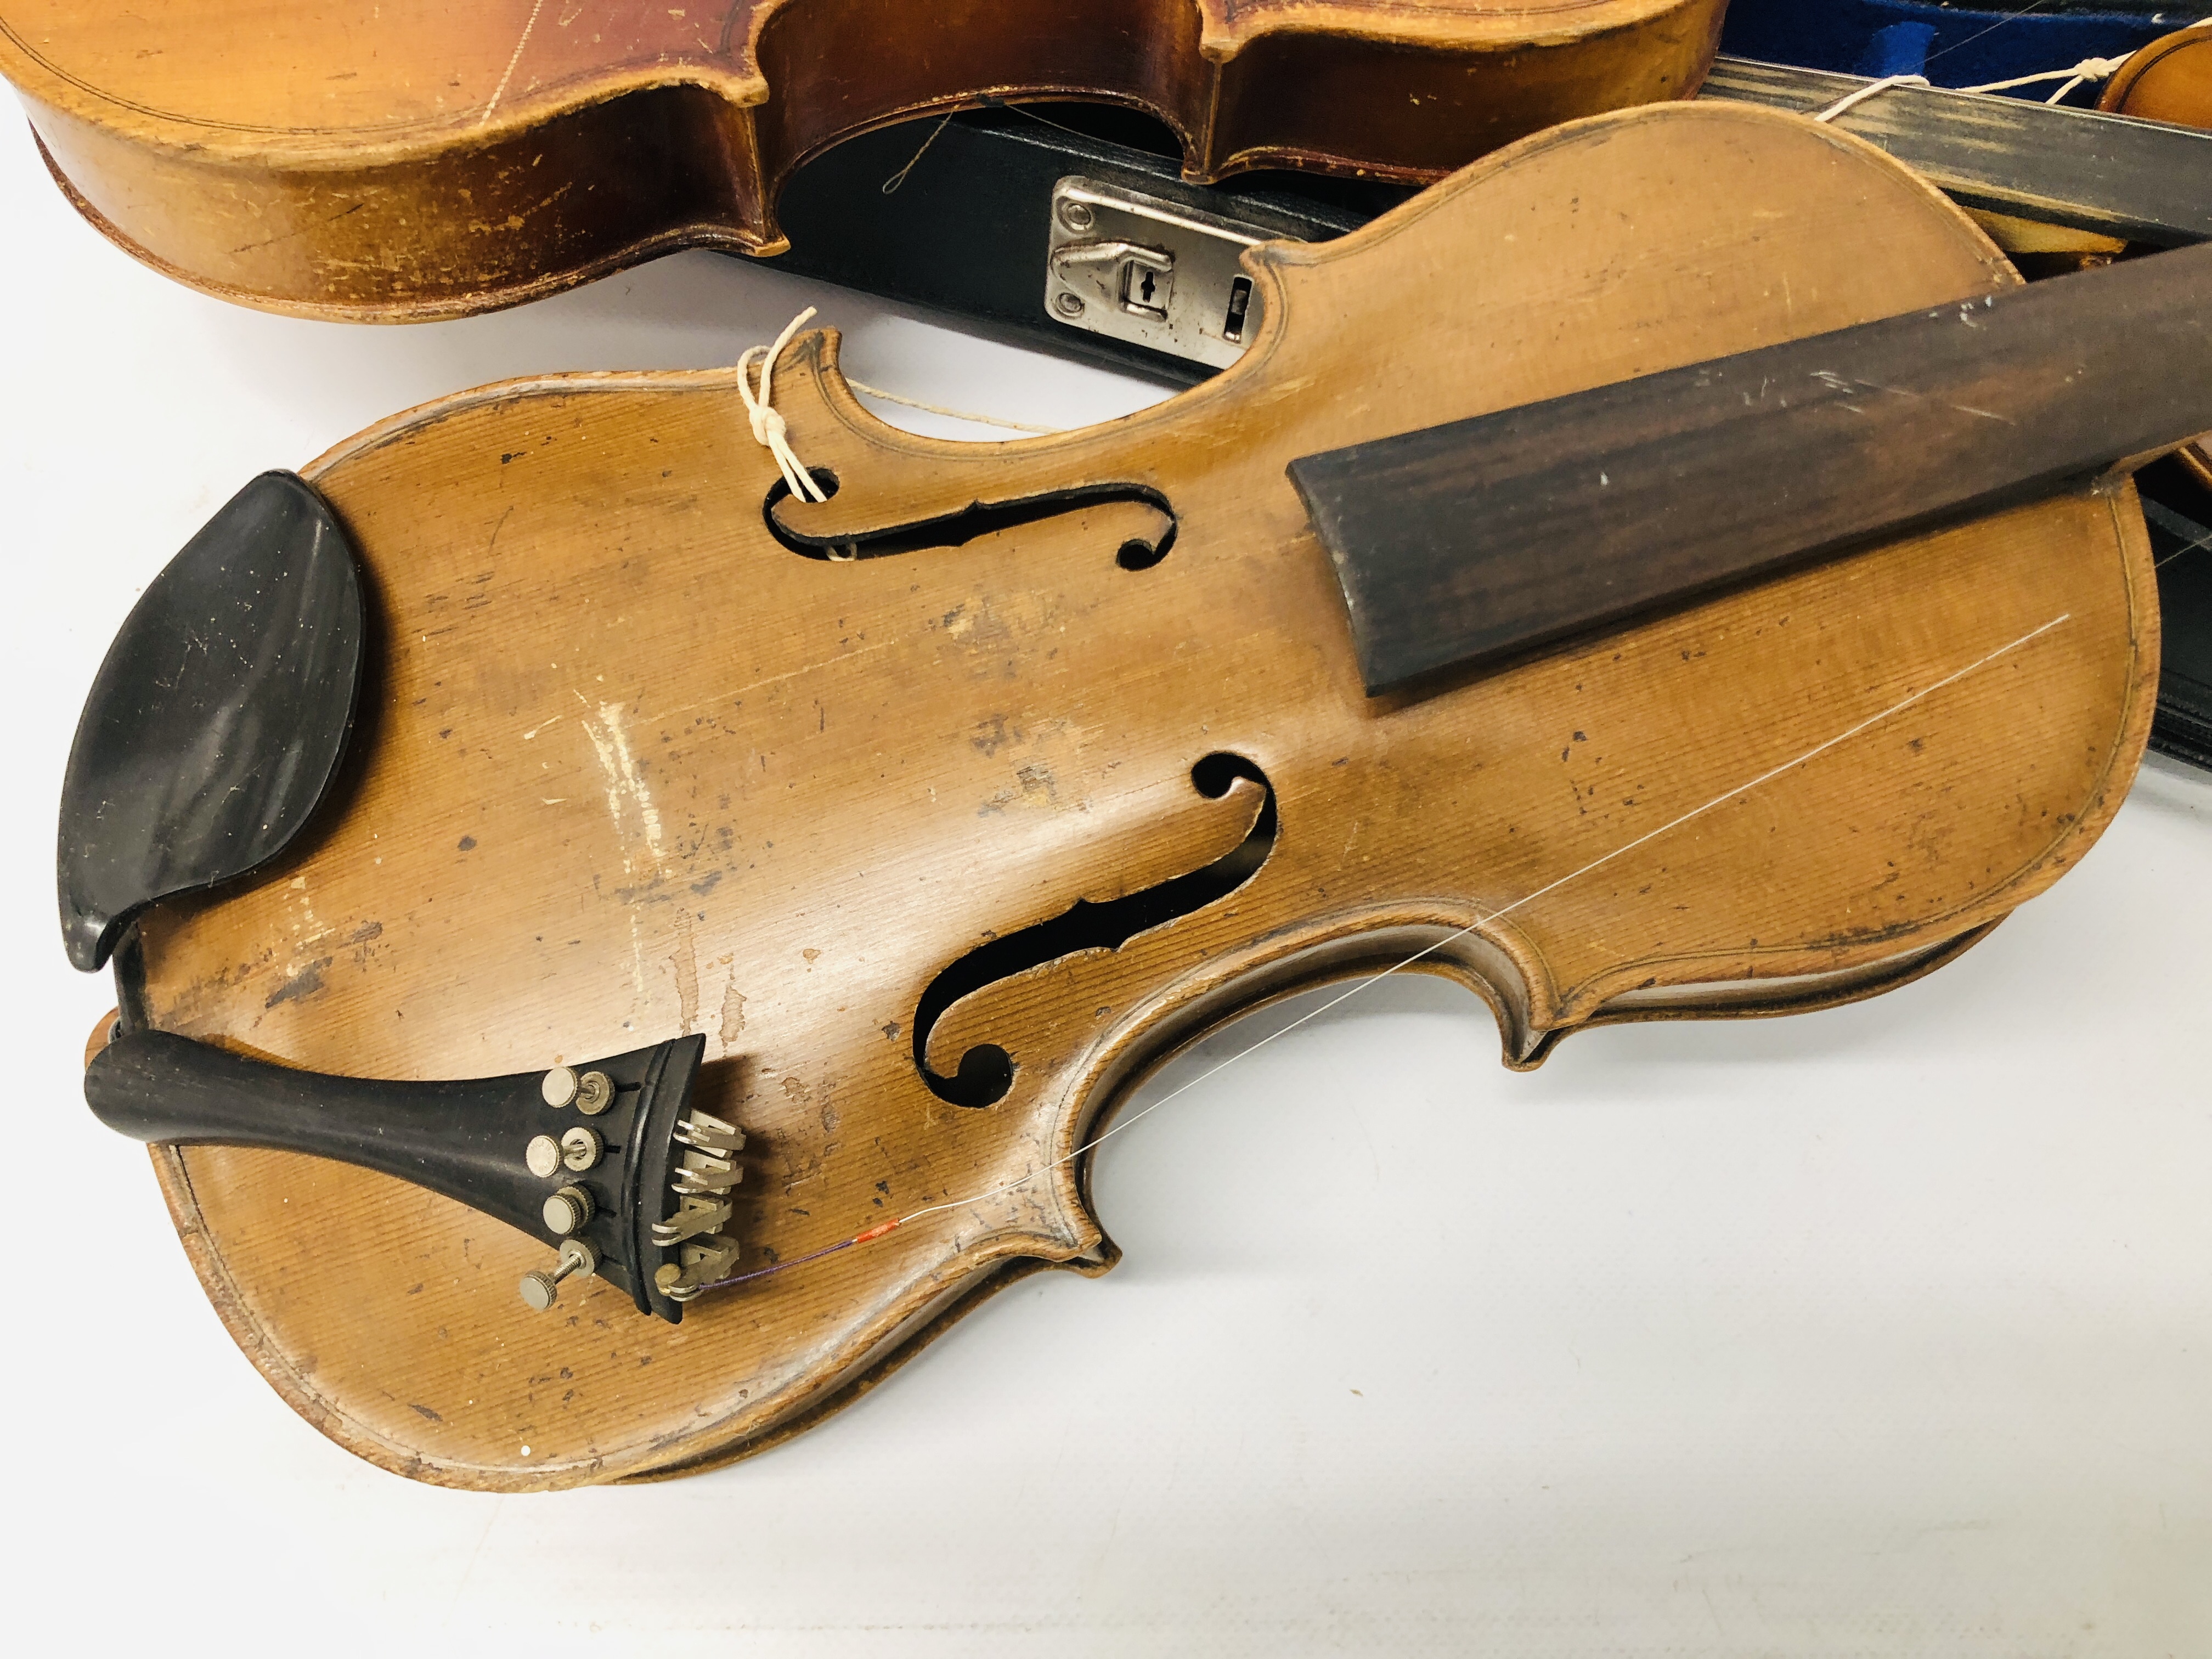 4 X VINTAGE VIOLINS AND 2 WOODEN CASES, VARIOUS BOWS (NO STRINGS) FOR RESTORATION. - Image 2 of 20